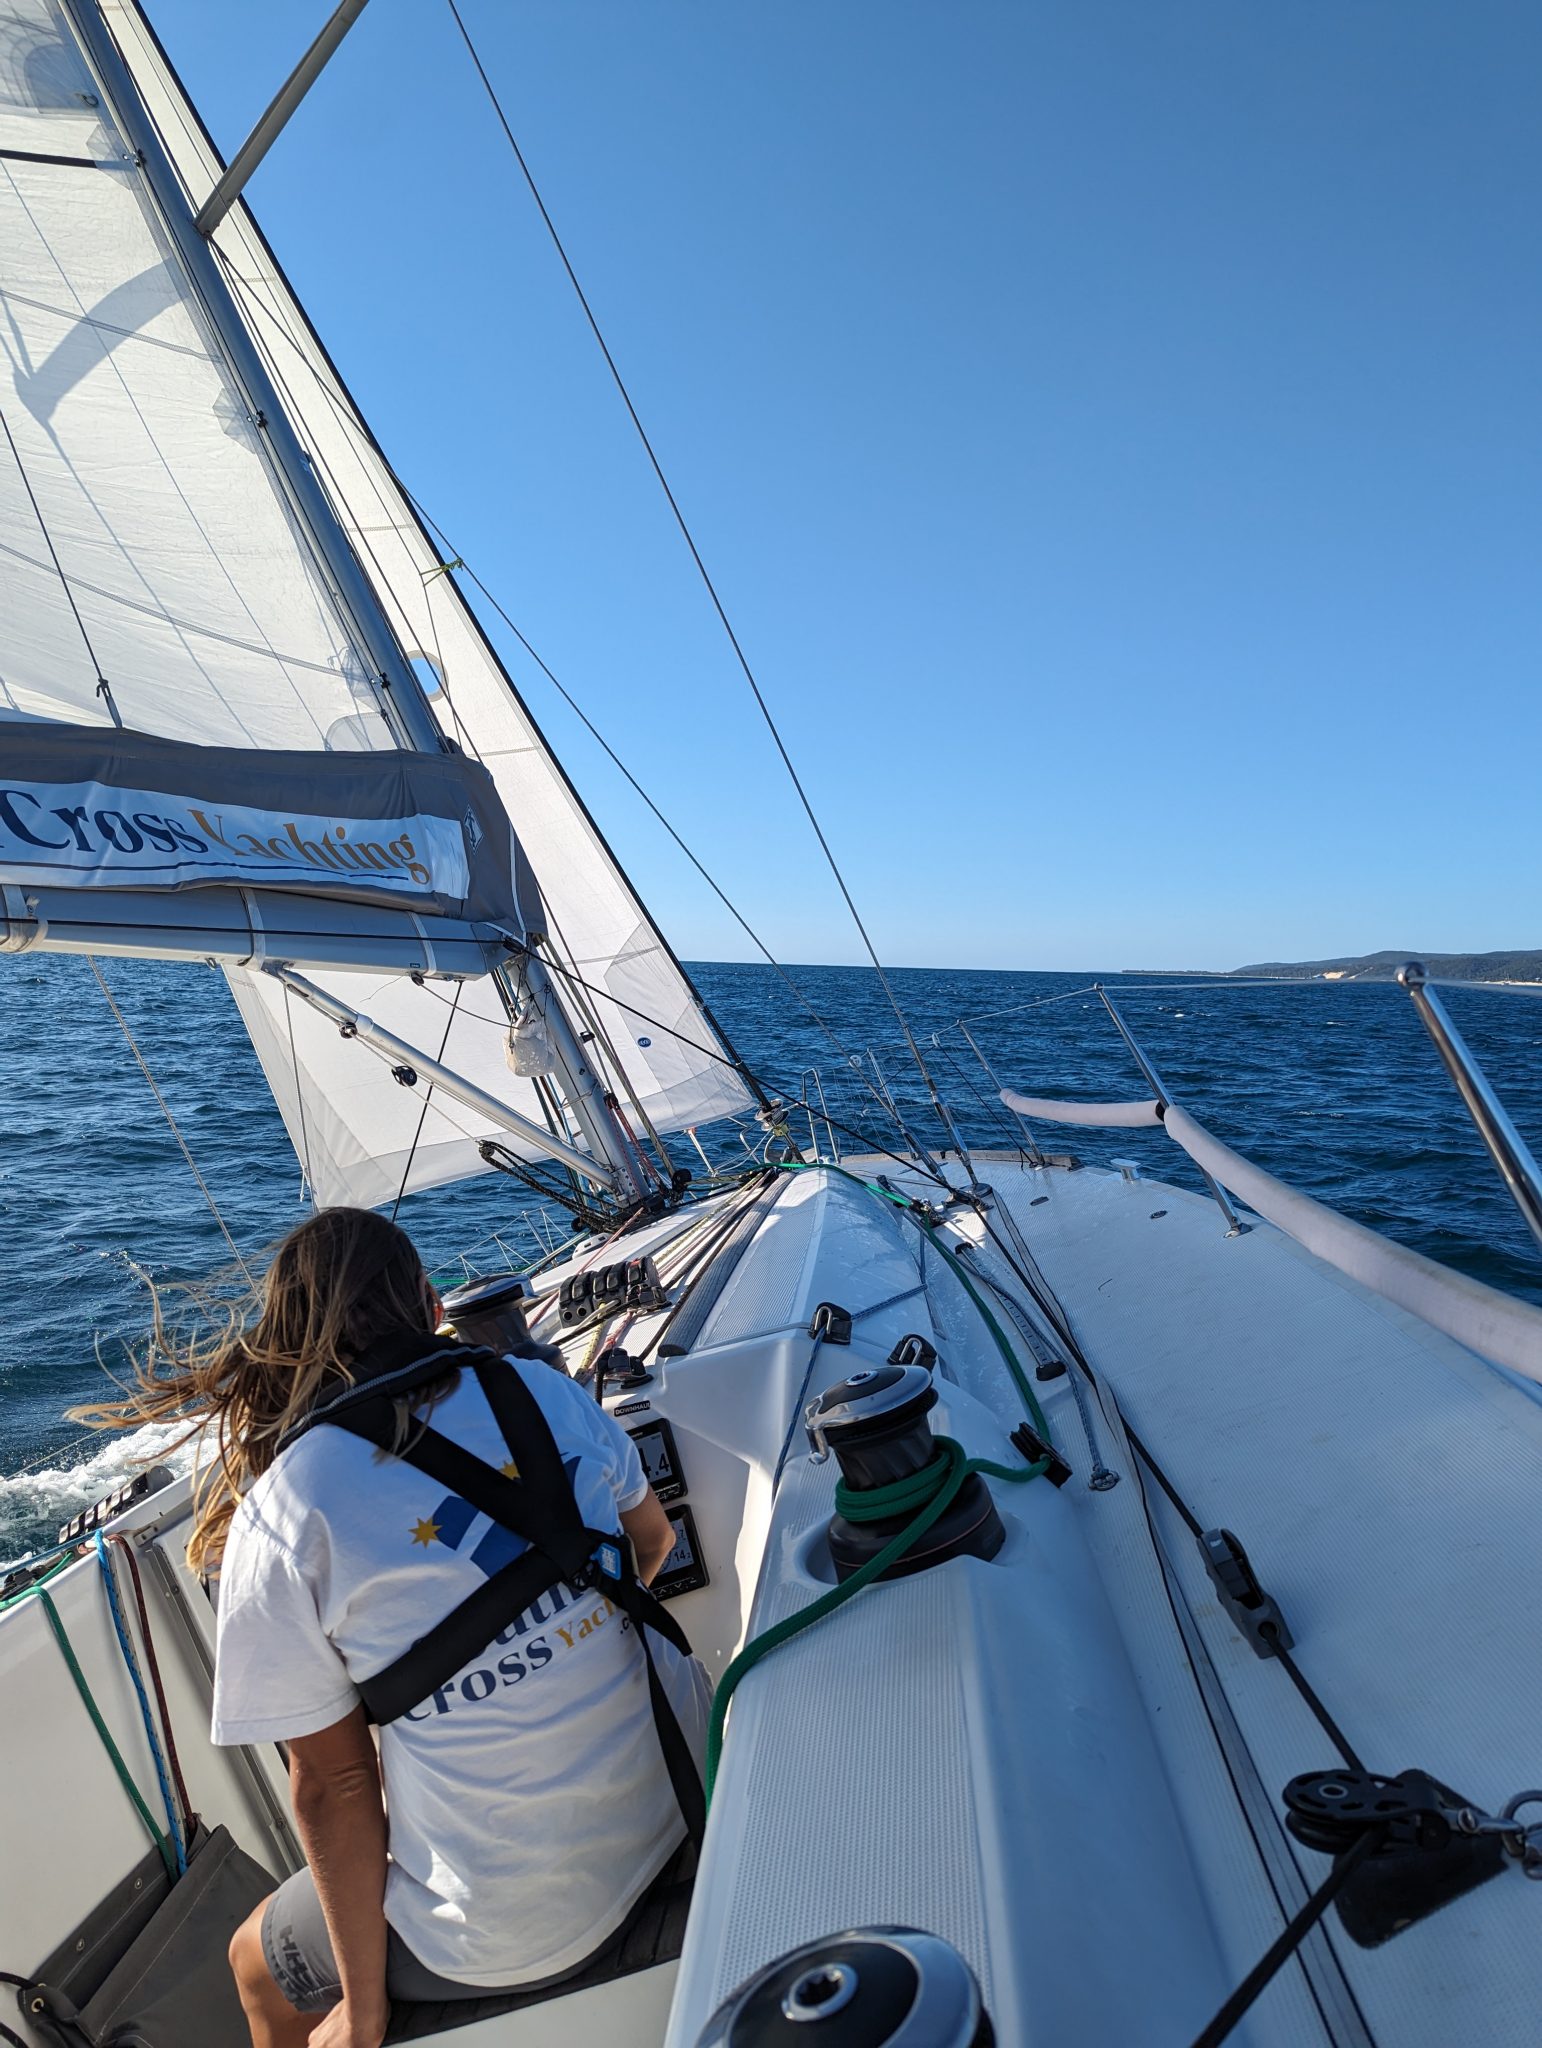 Sail boat at sea | Featured image for the Advanced Sailing Courses Page from Southern Cross Yachting.